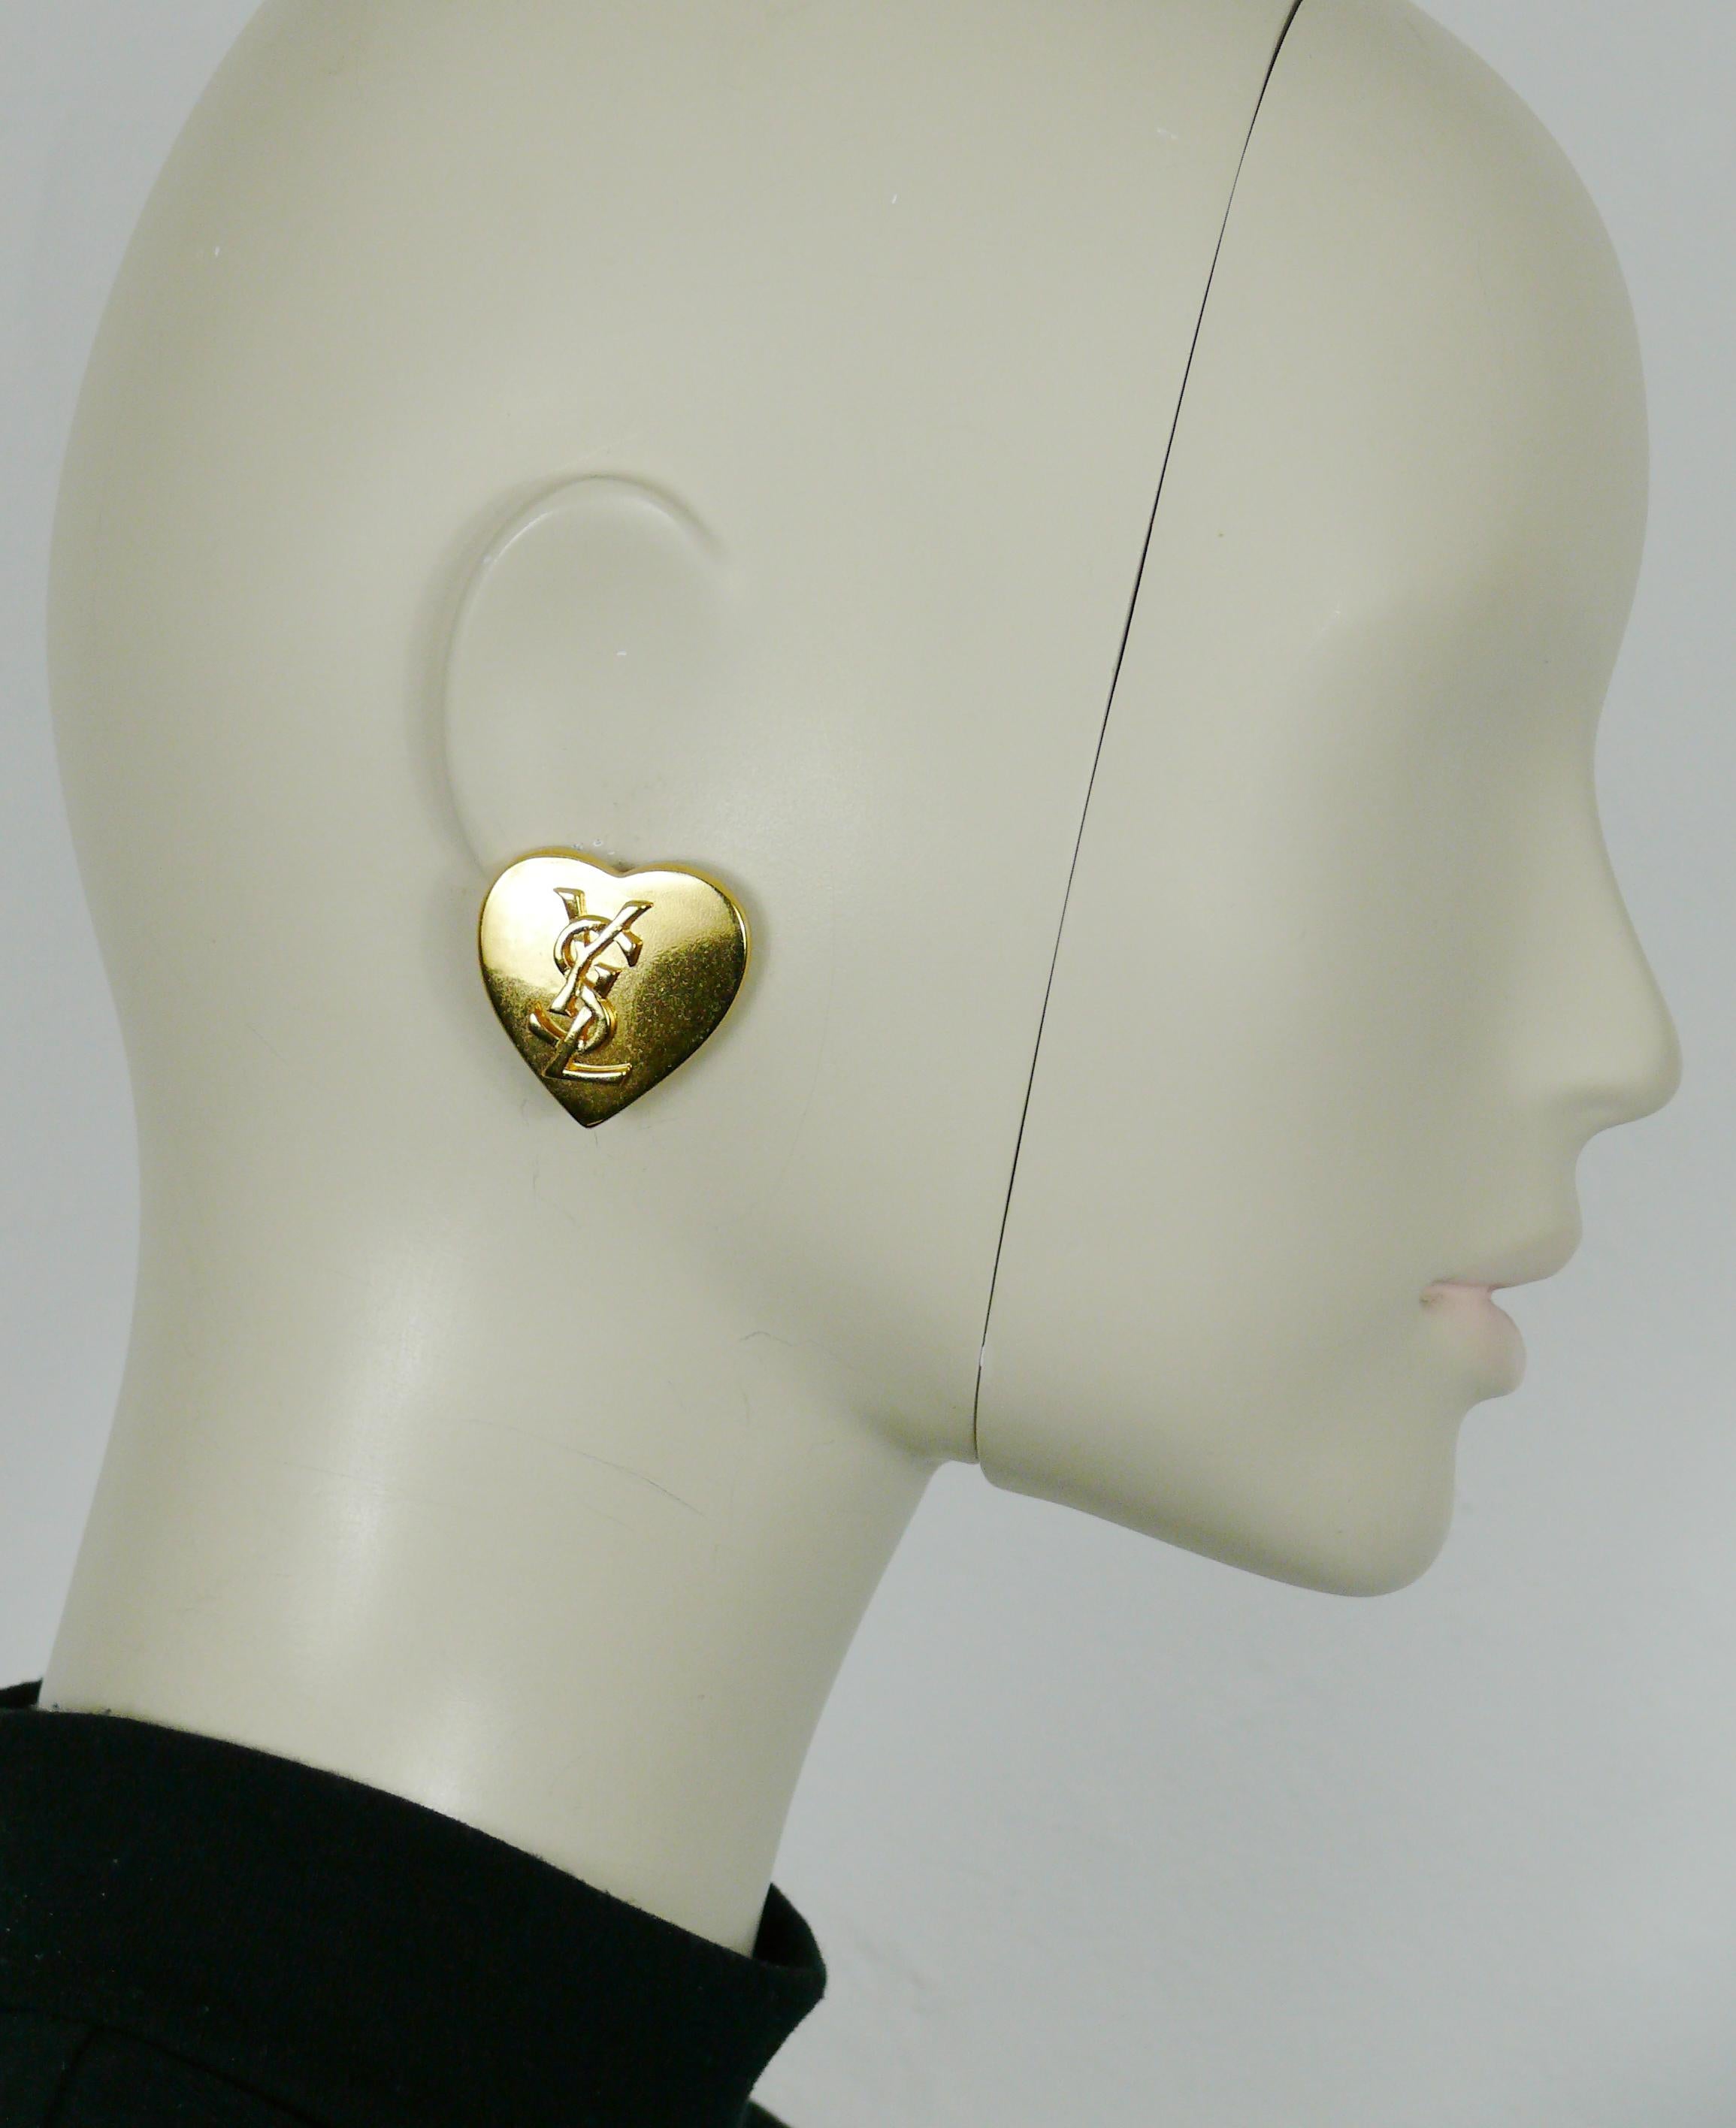 YVES SAINT LAURENT vintage gold tone heart clip-on earrings featuring an YSL logo at the center.

Embossed YSL Made in France.

Indicative measurements : max. height approx. 3.1 cm (1.22 inches) / max. width approx. 3 cm (1.18 inches).

Weight per